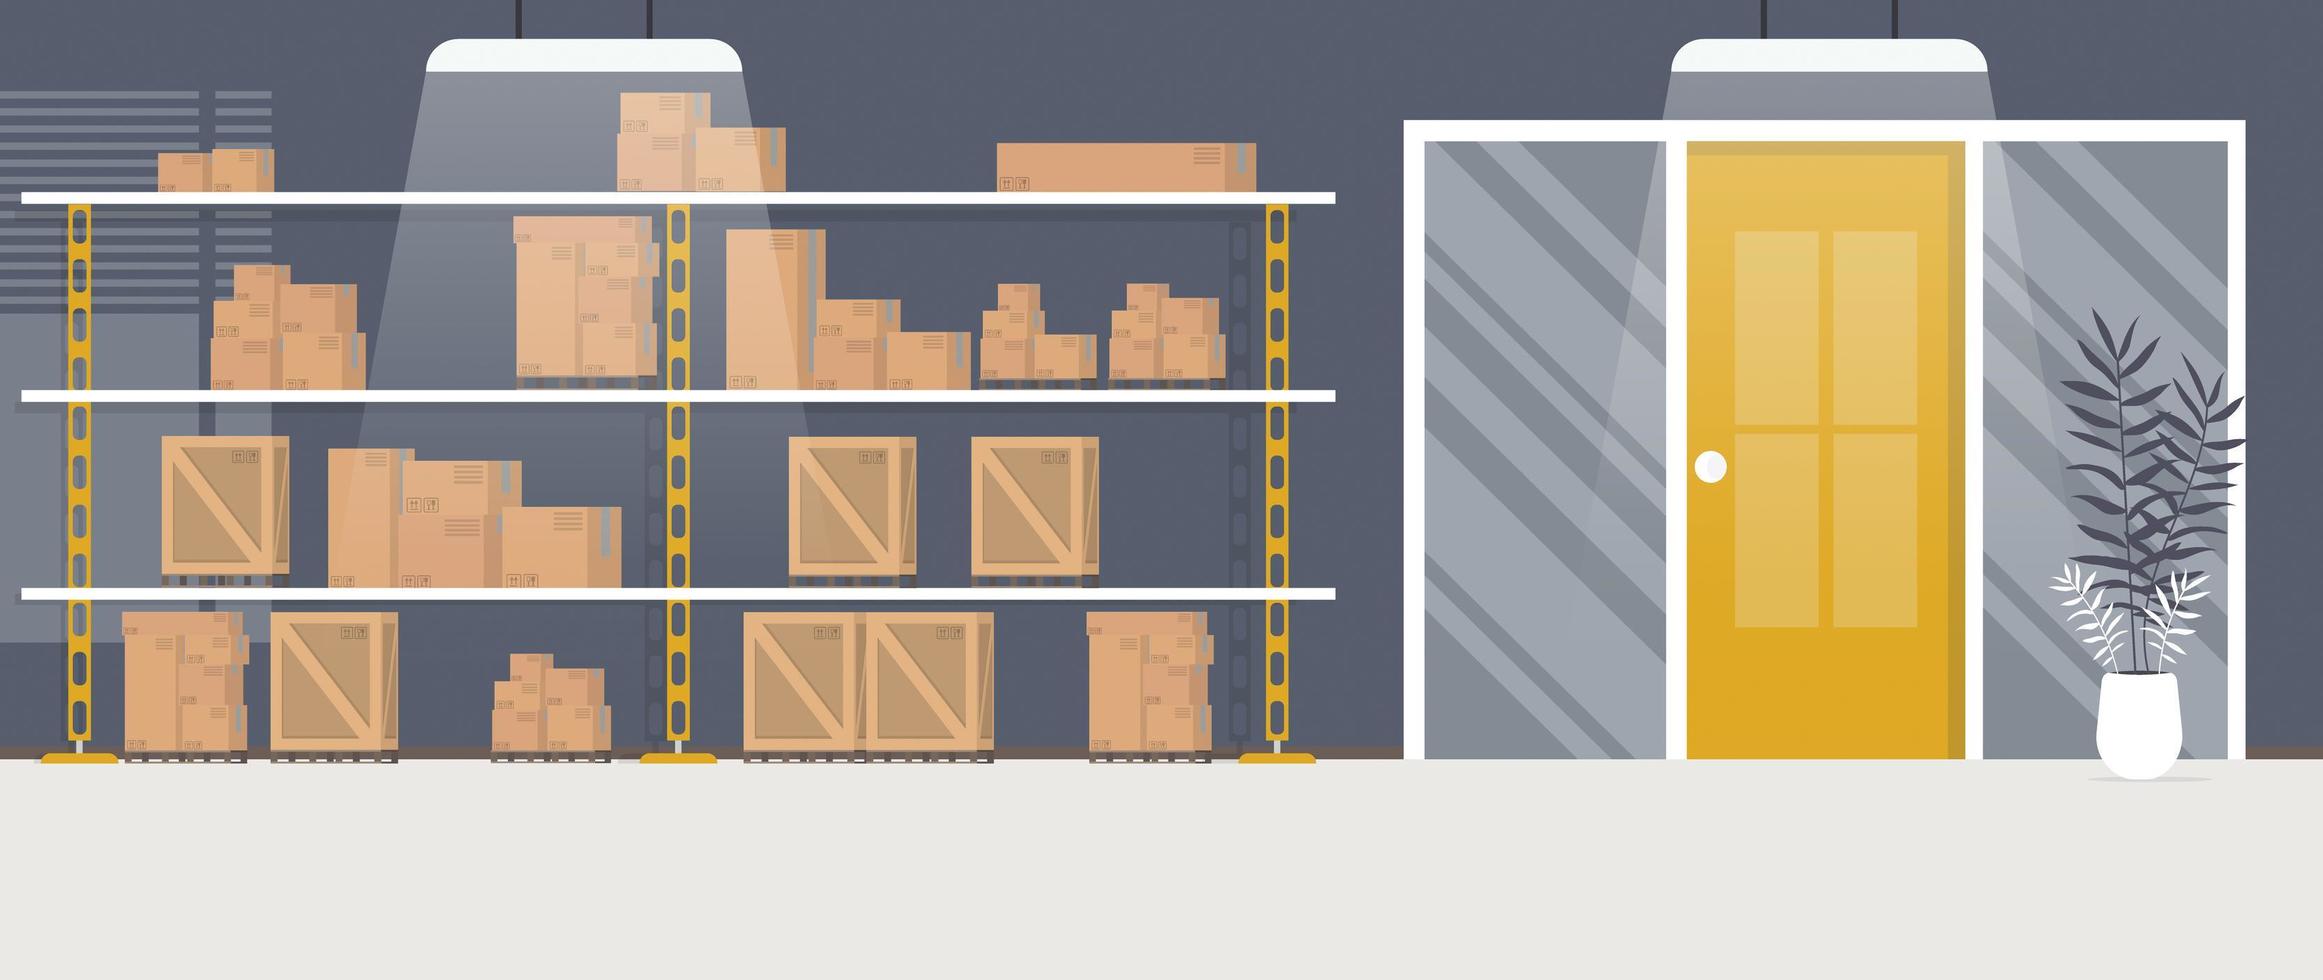 Warehouse with racks and boxes. Large warehouse. Cartoon style. Vector illustration.